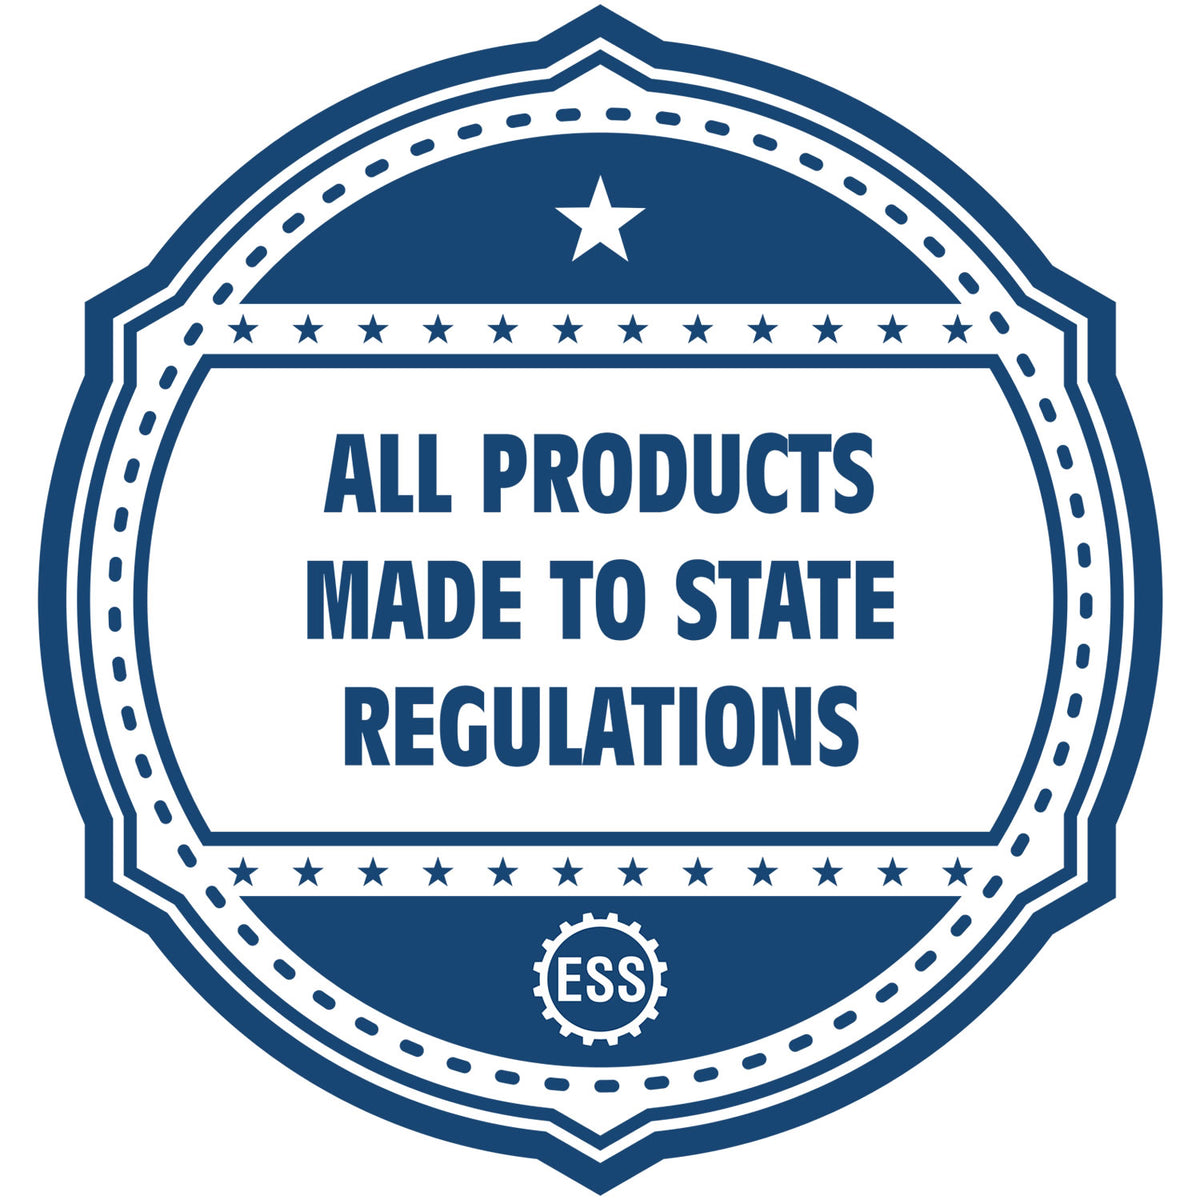 A blue icon or badge for the Hybrid Louisiana Engineer Seal showing that this product is made in compliance with state regulations.